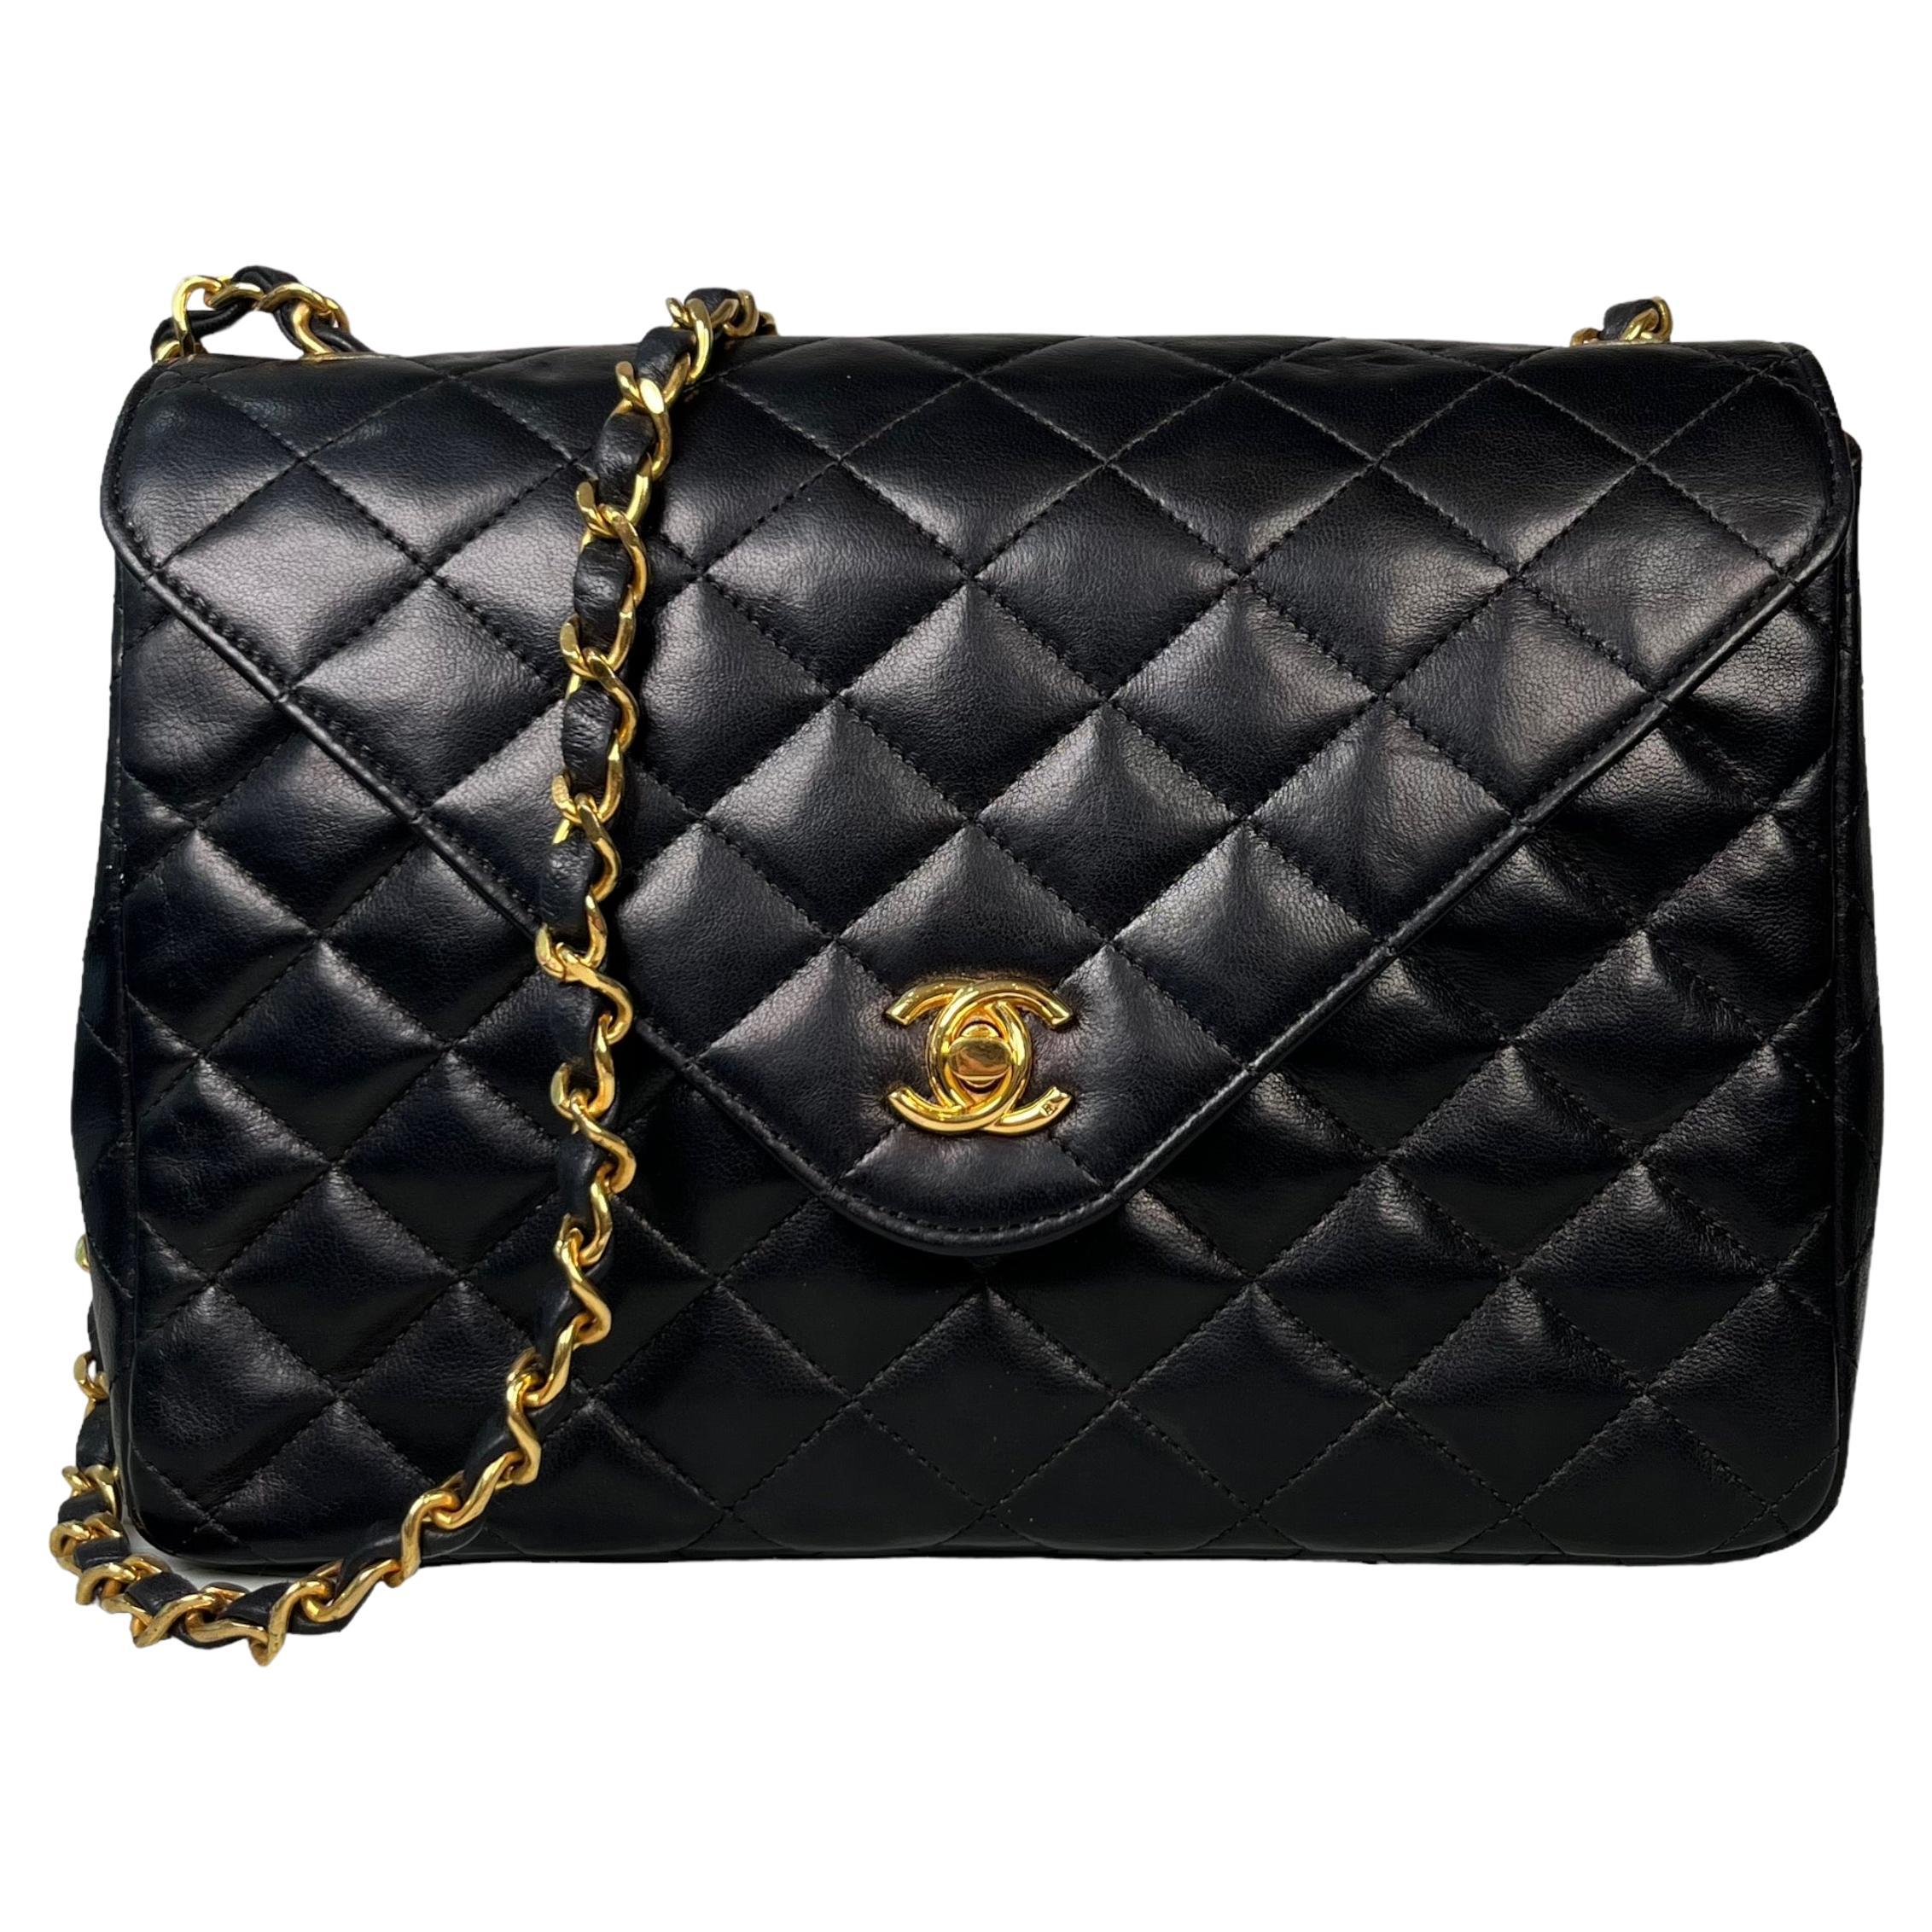 CHANEL Lambskin Quilted Envelope Flap Bag